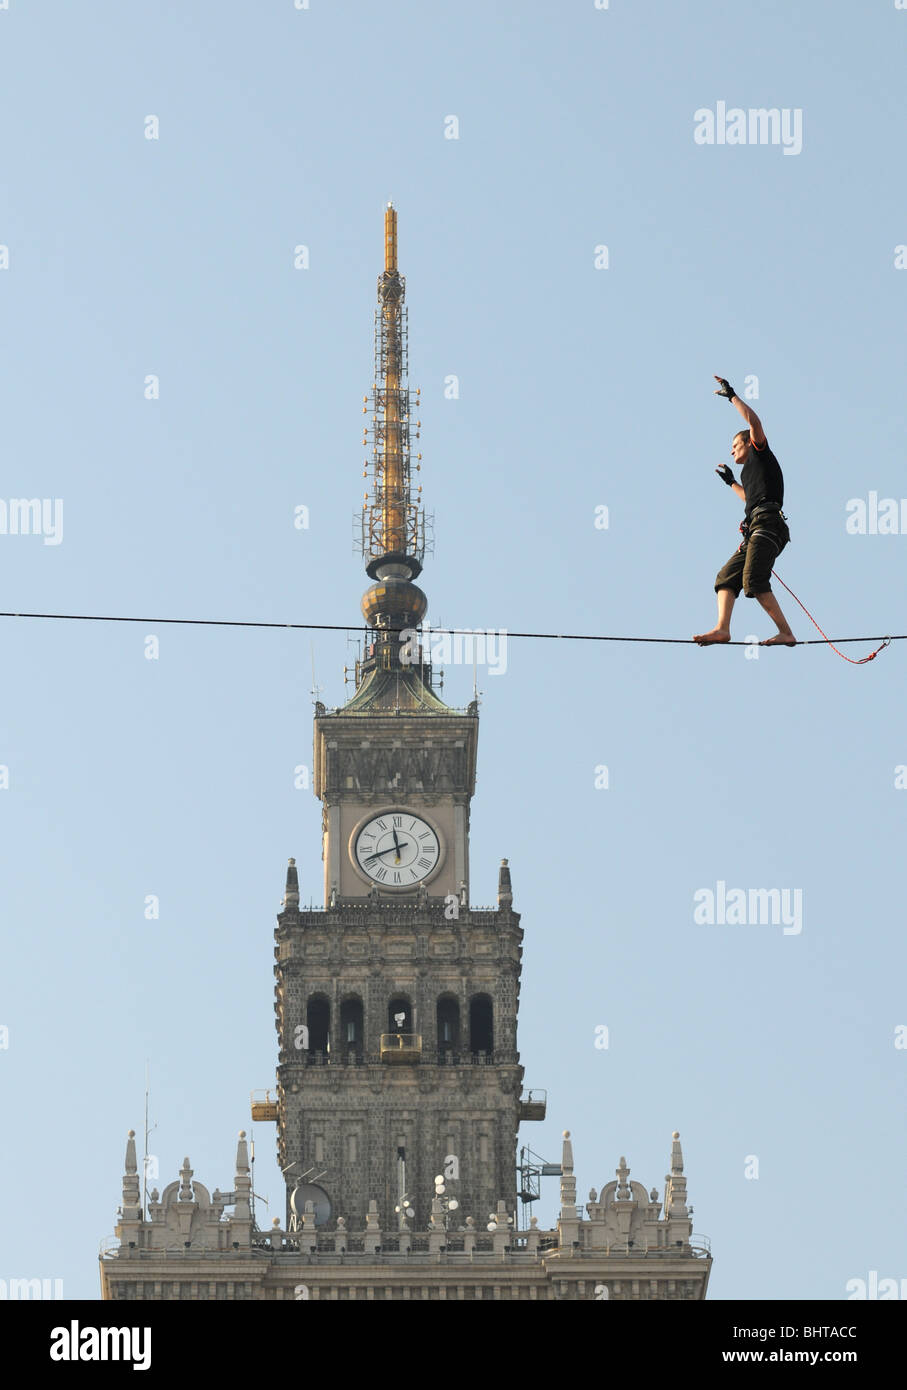 Polish slackliner Damian Czermak during show in Warsaw, Poland. Palace of Culture and Science building on background. Stock Photo